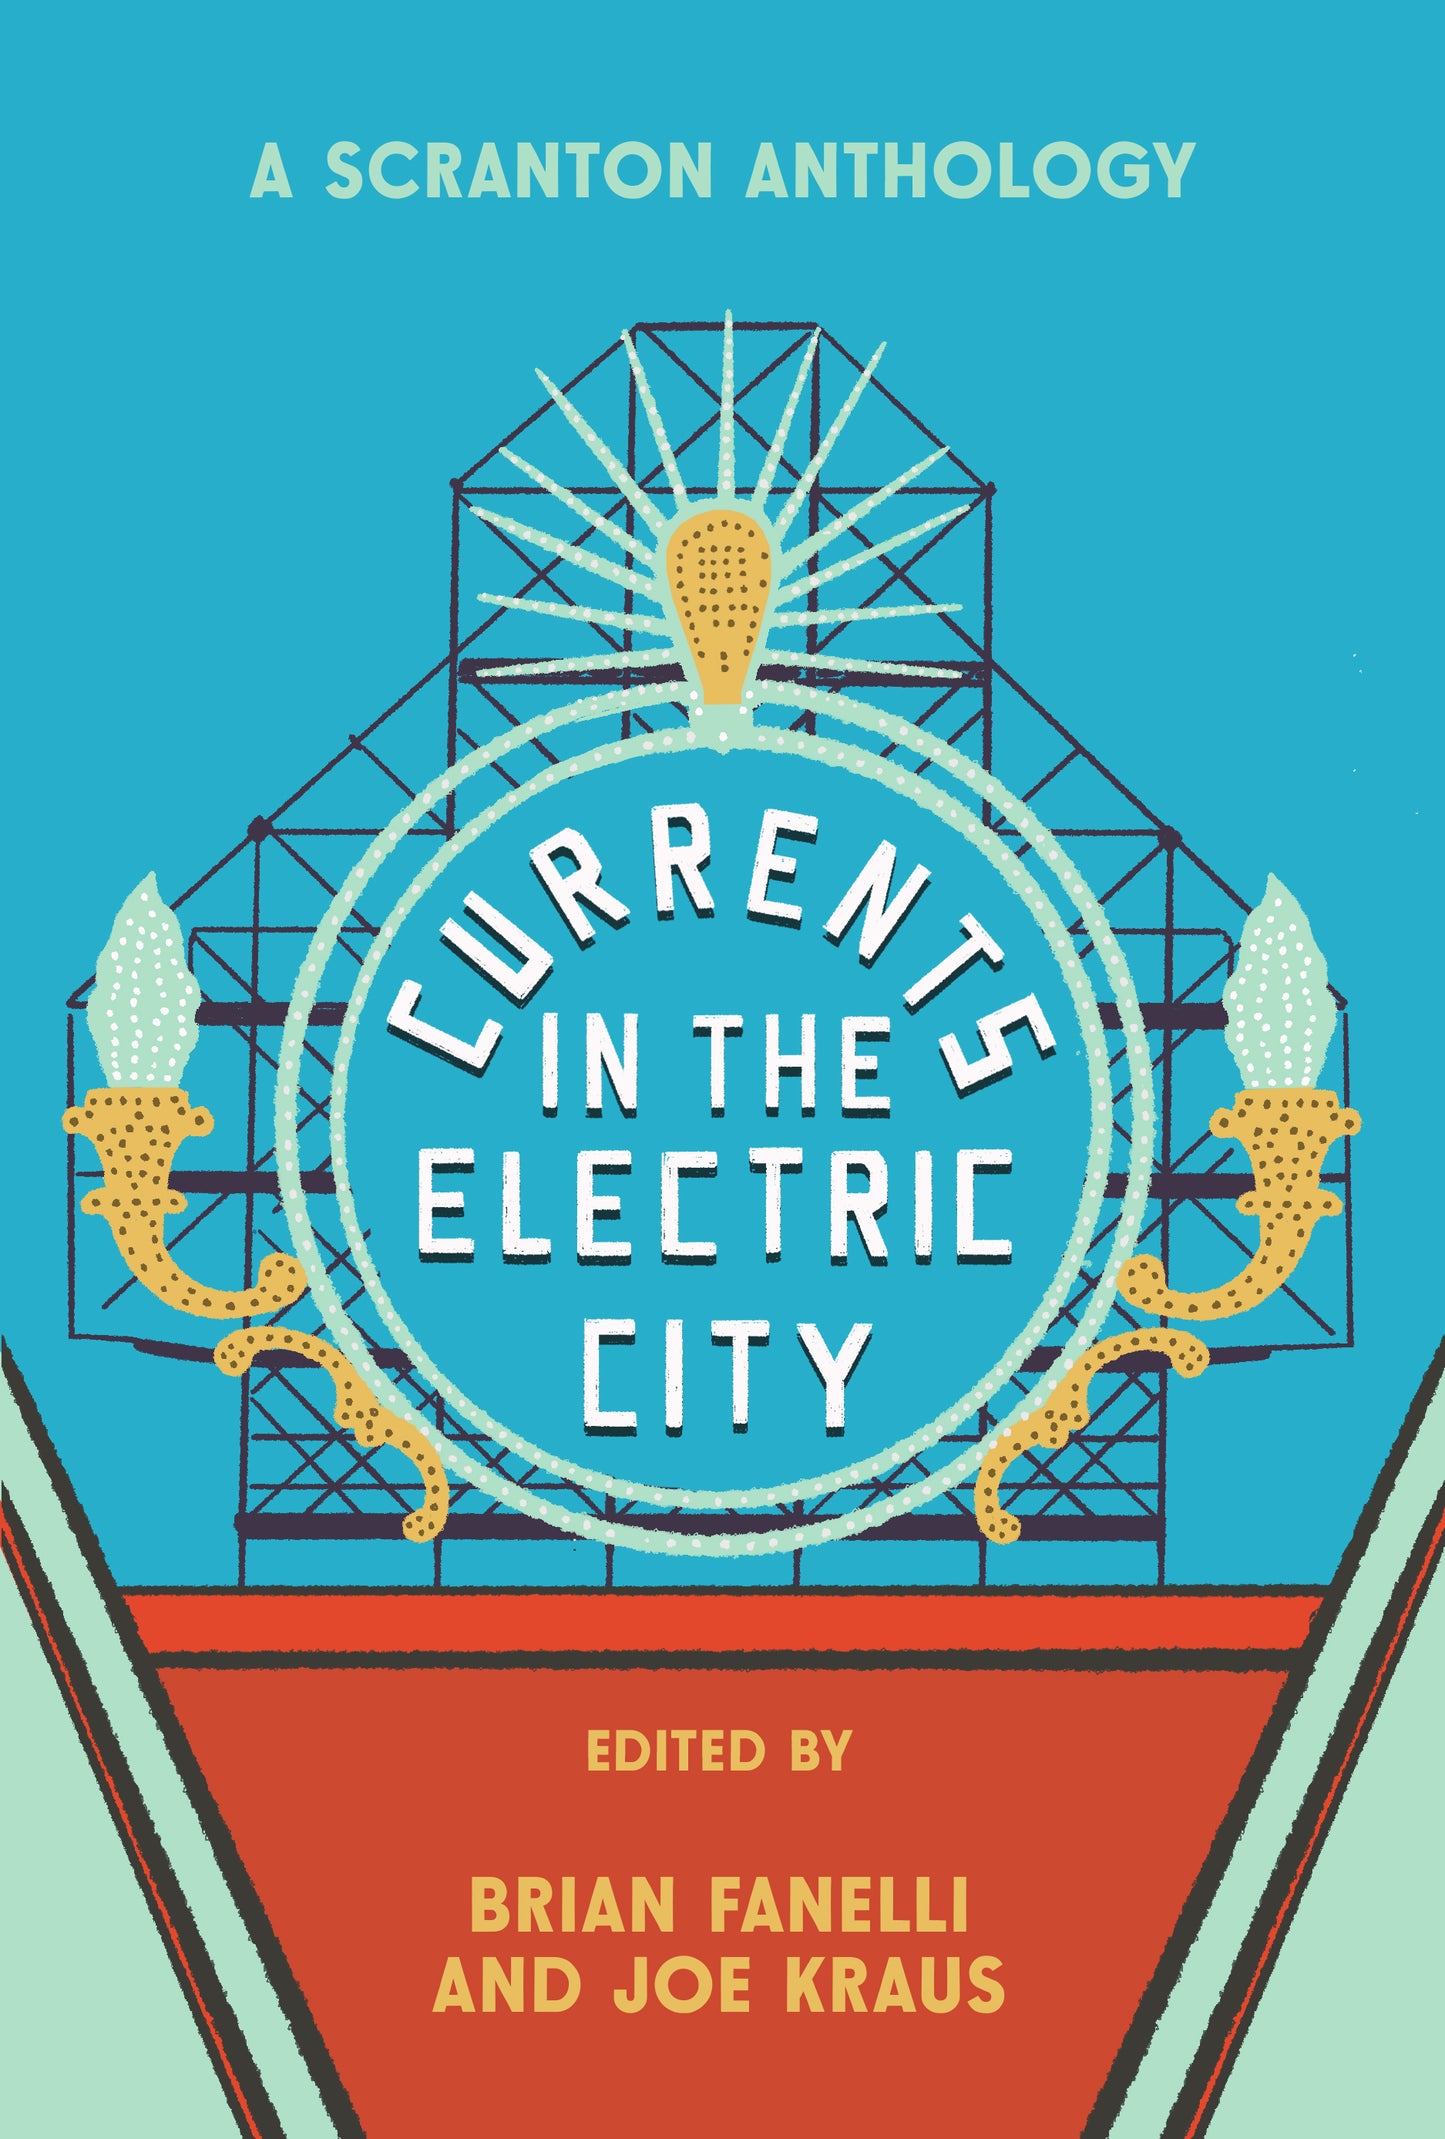 Currents in the Electric City: A Scranton Anthology